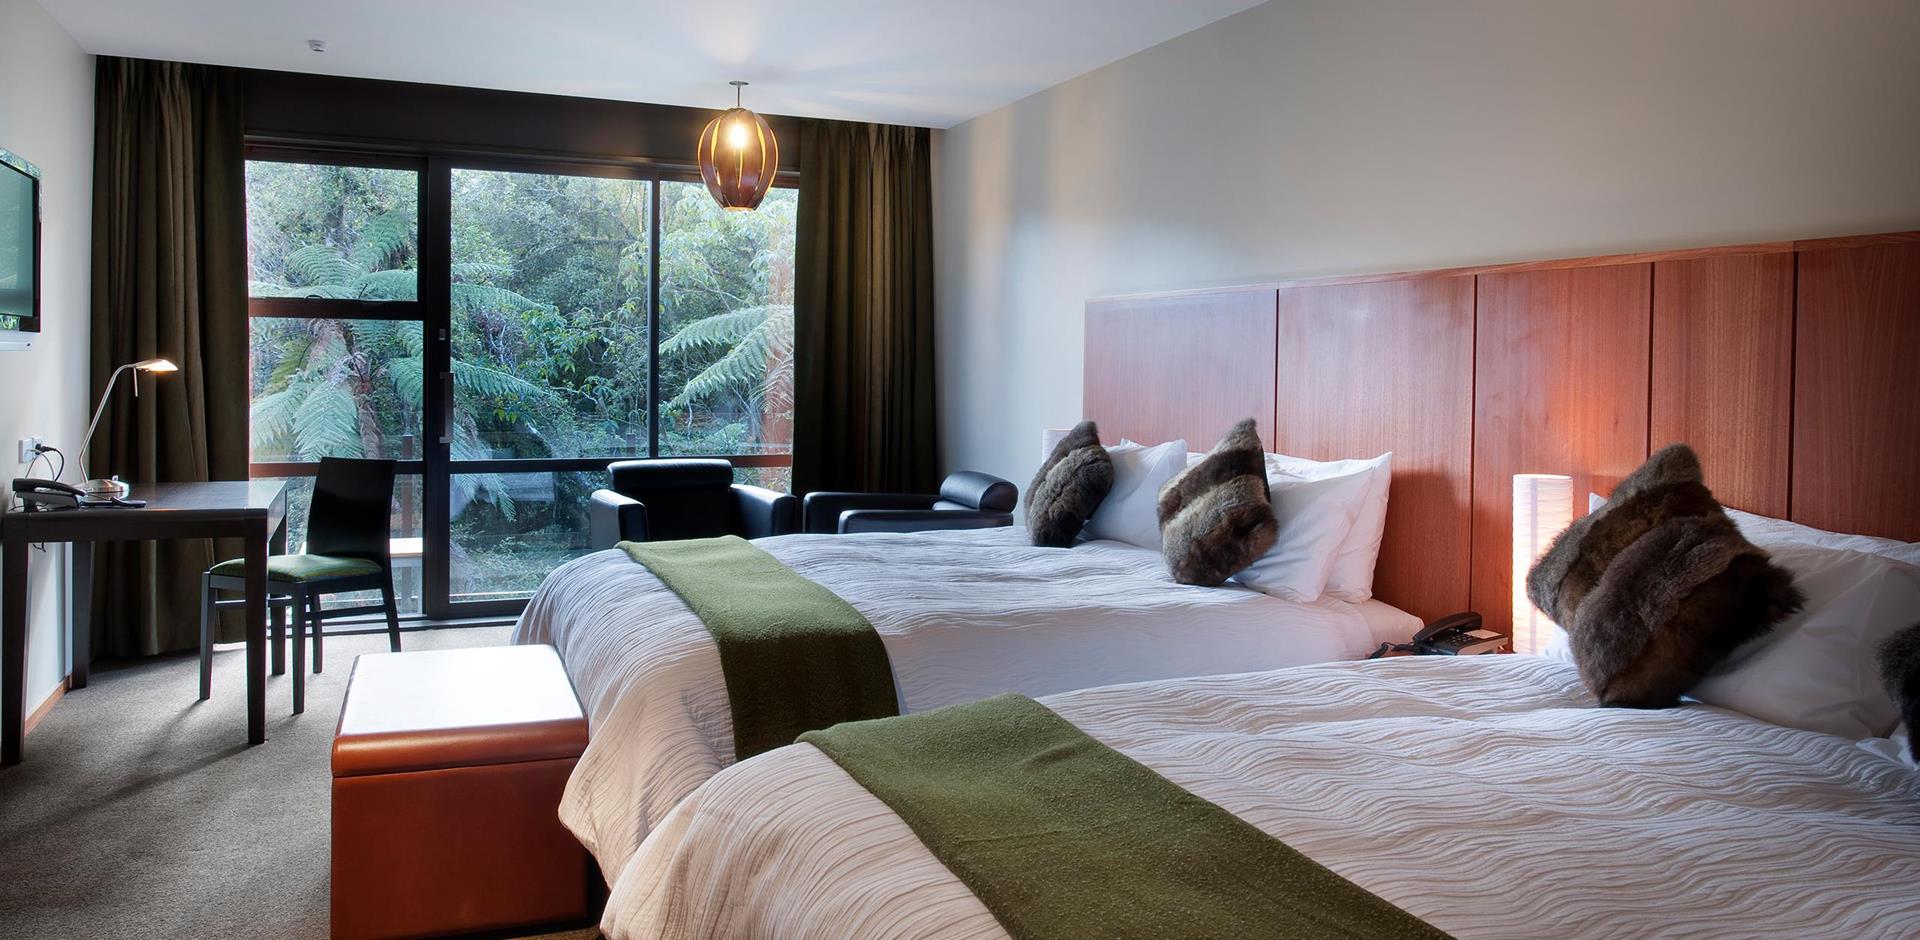 Bedroom, Te Waonui Forest Retreat, New Zealand